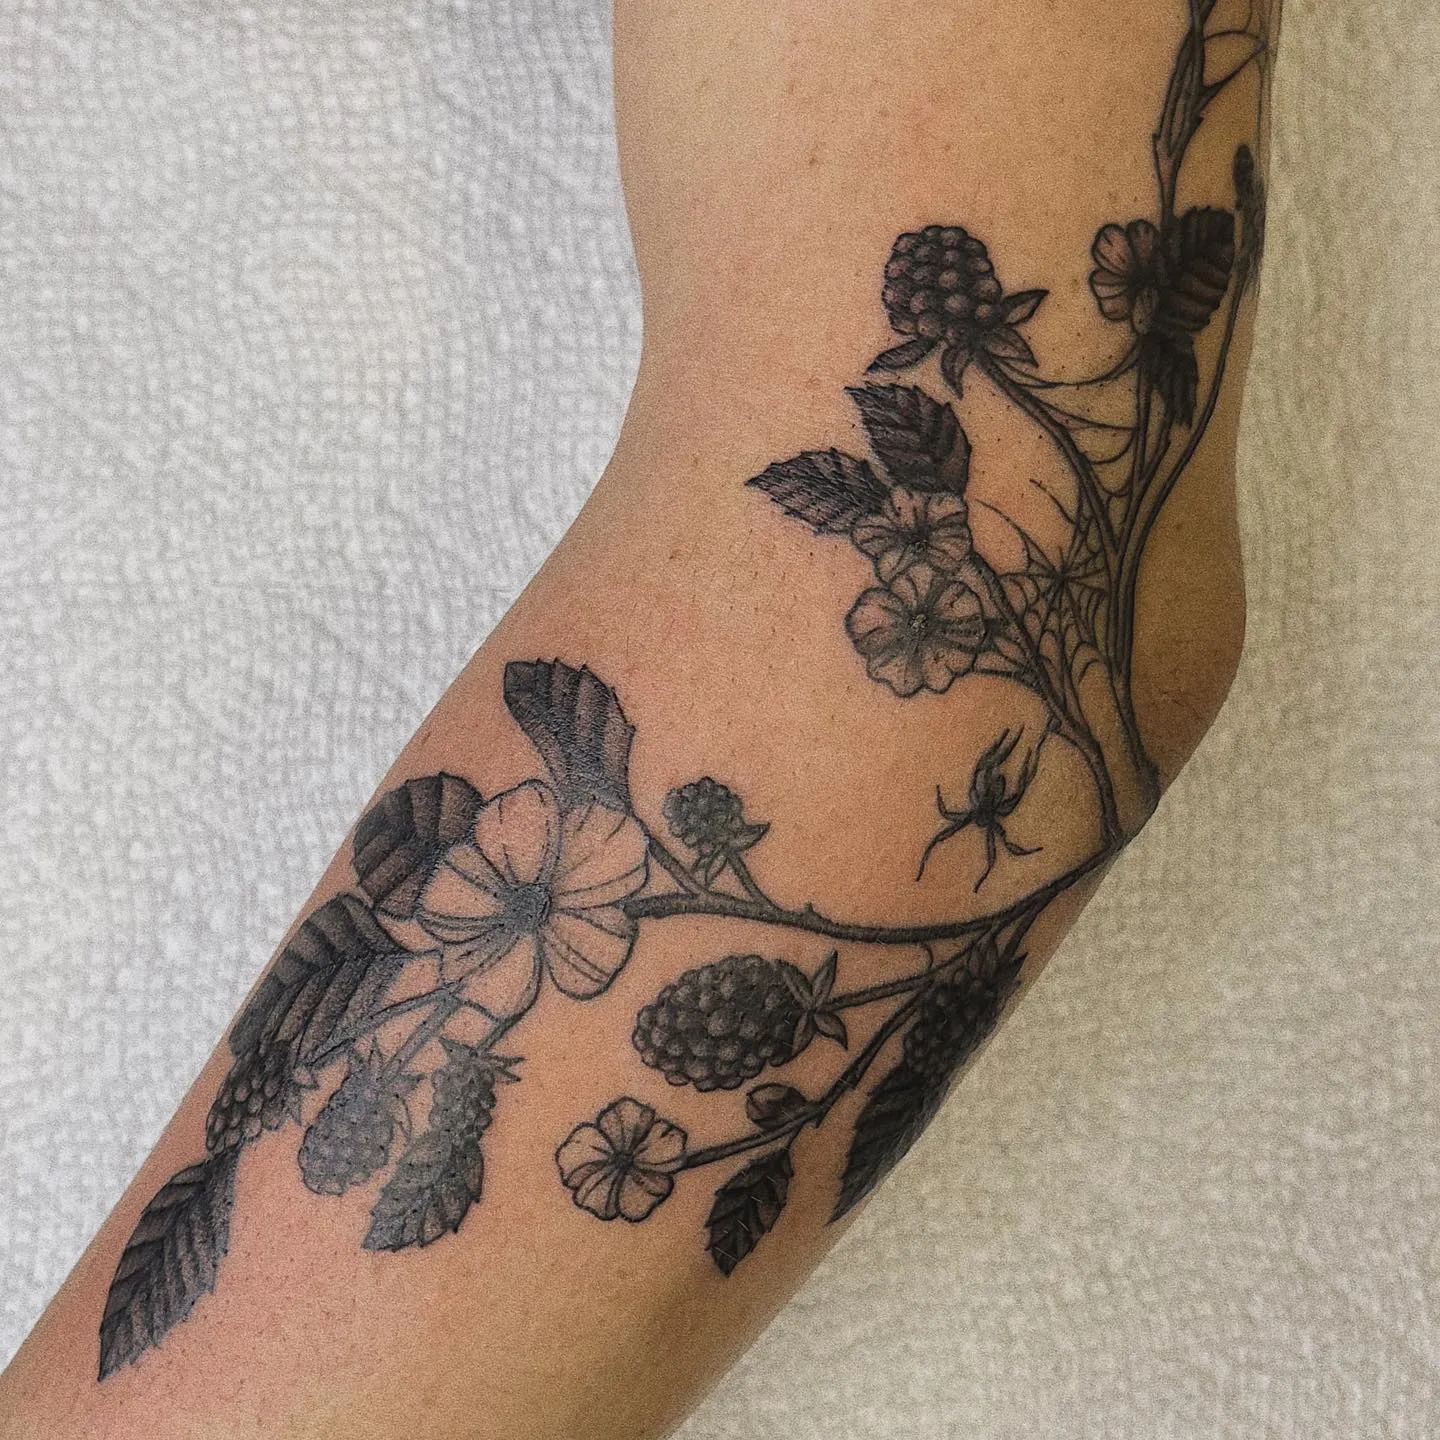 Blackberry bush with detailed flowers on arm